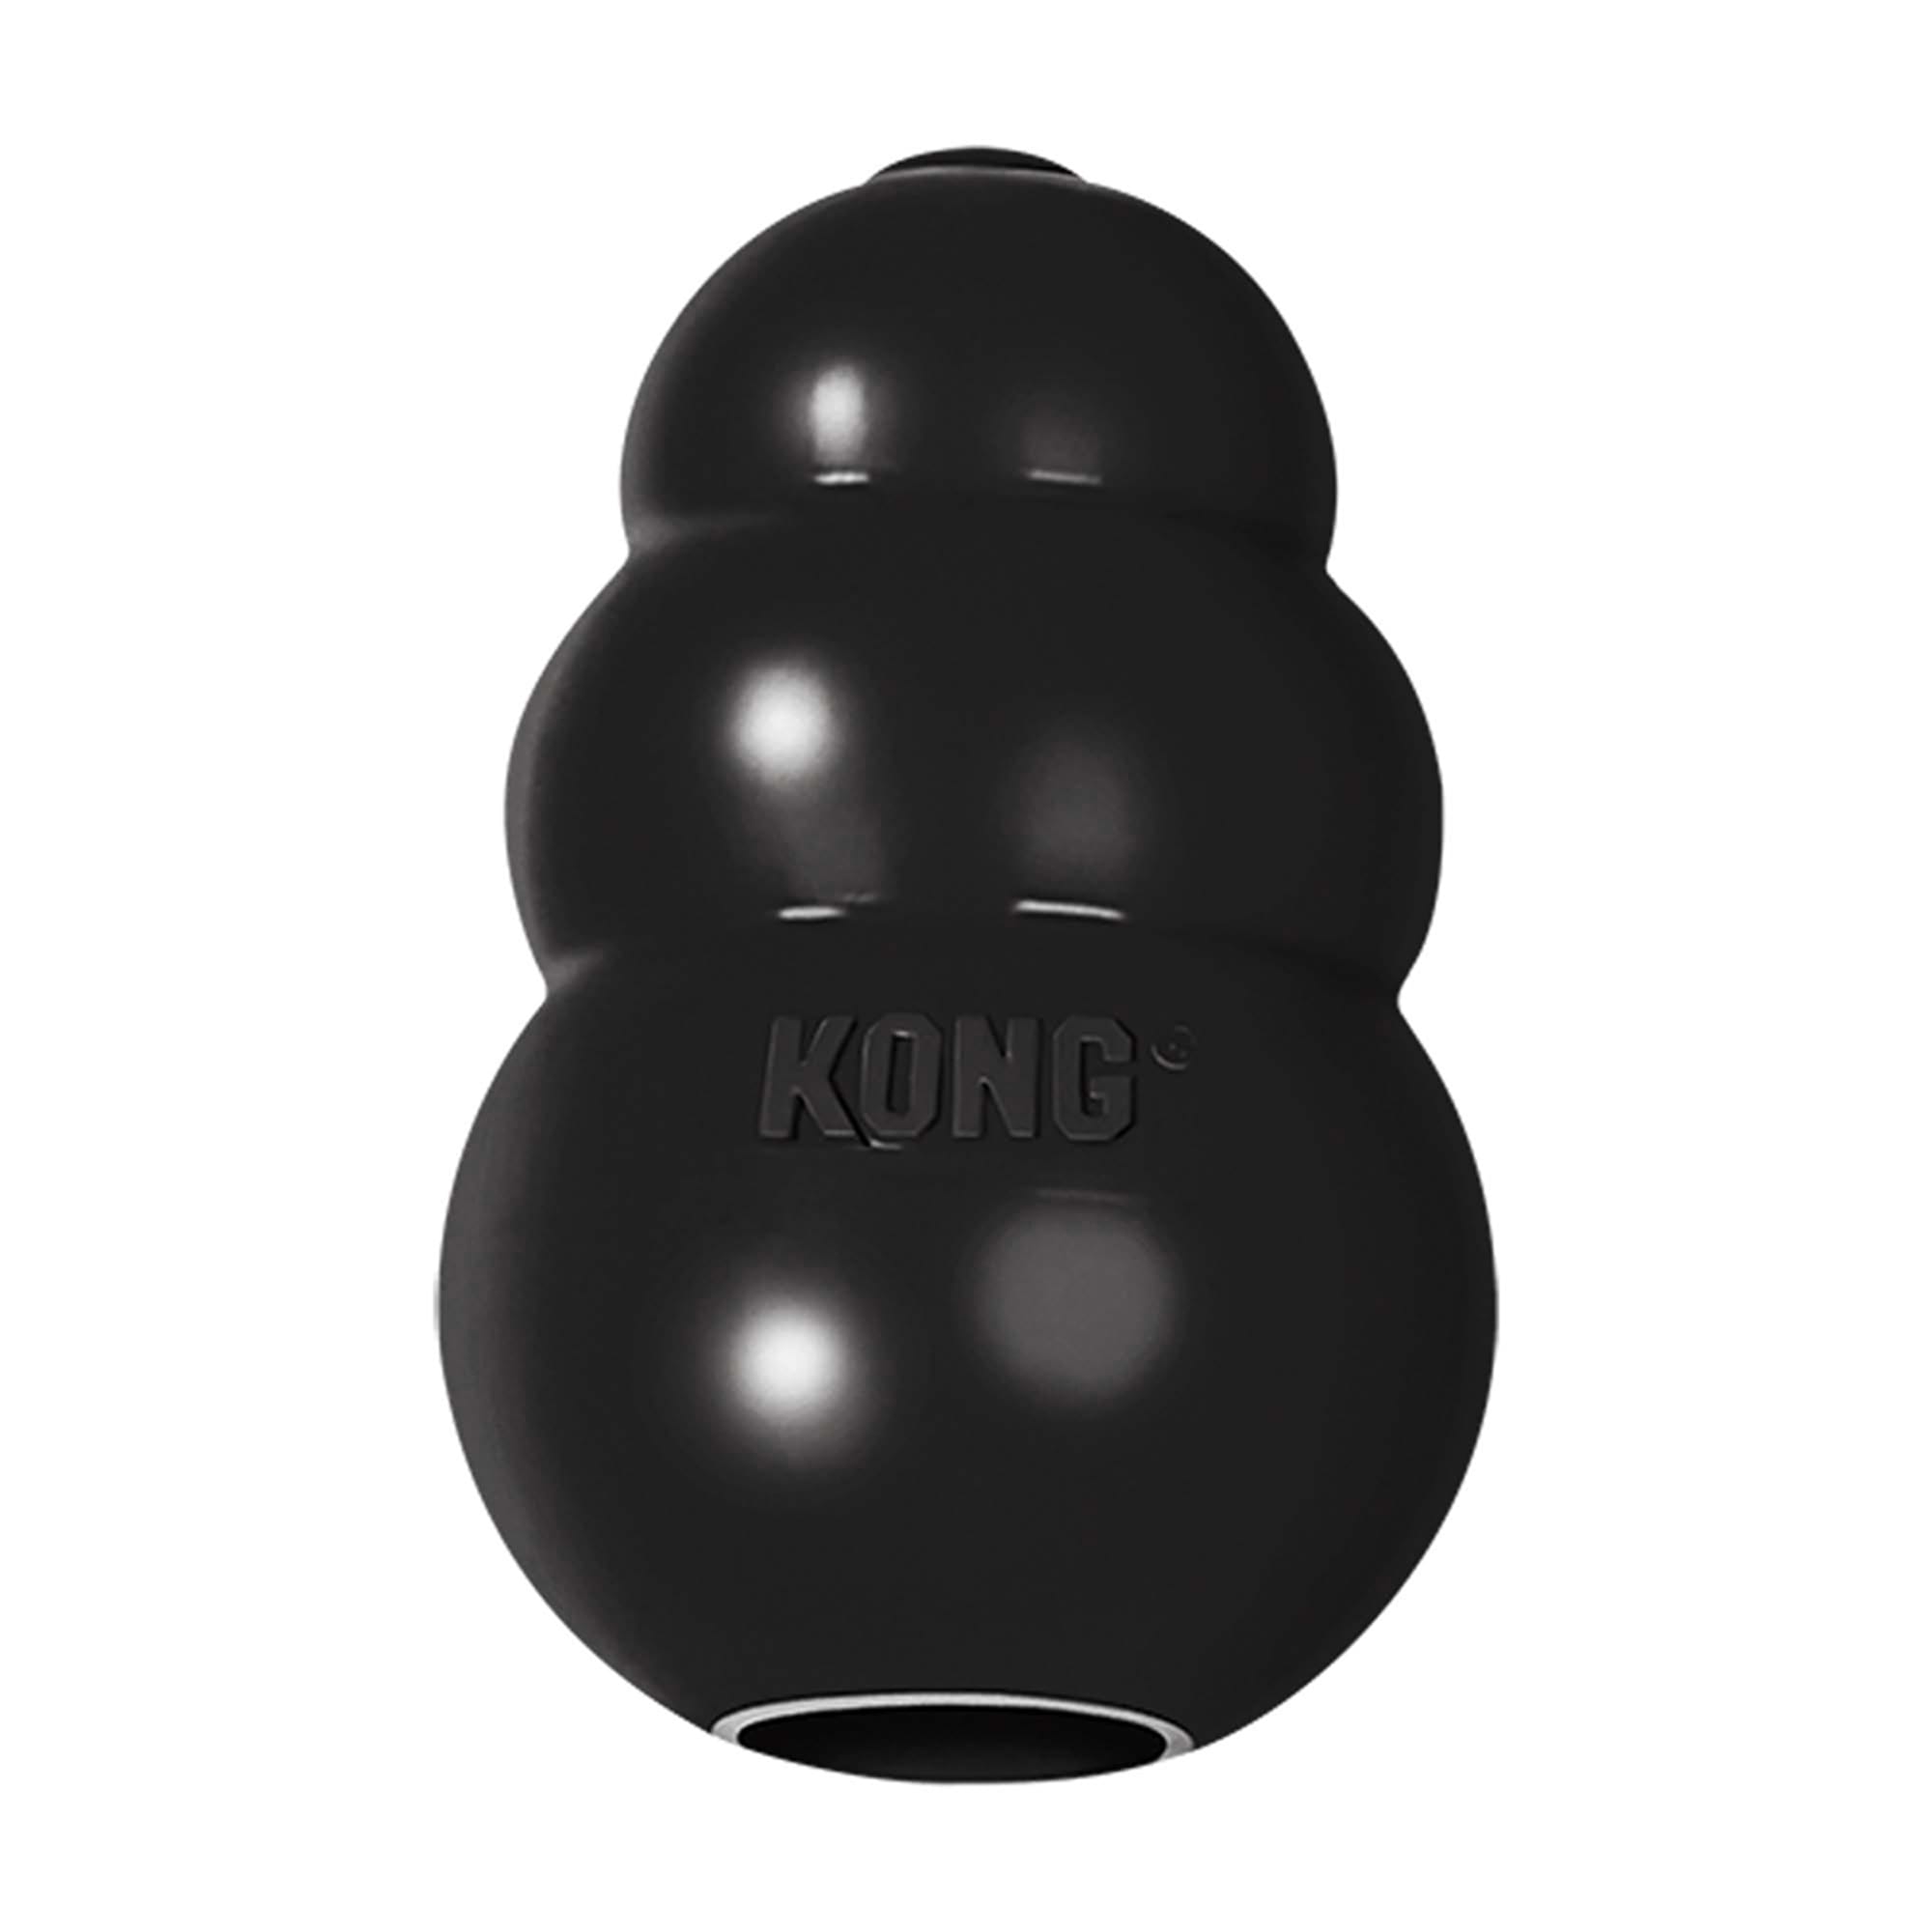 KONG Black Extreme Dog Toy, Small | Petco